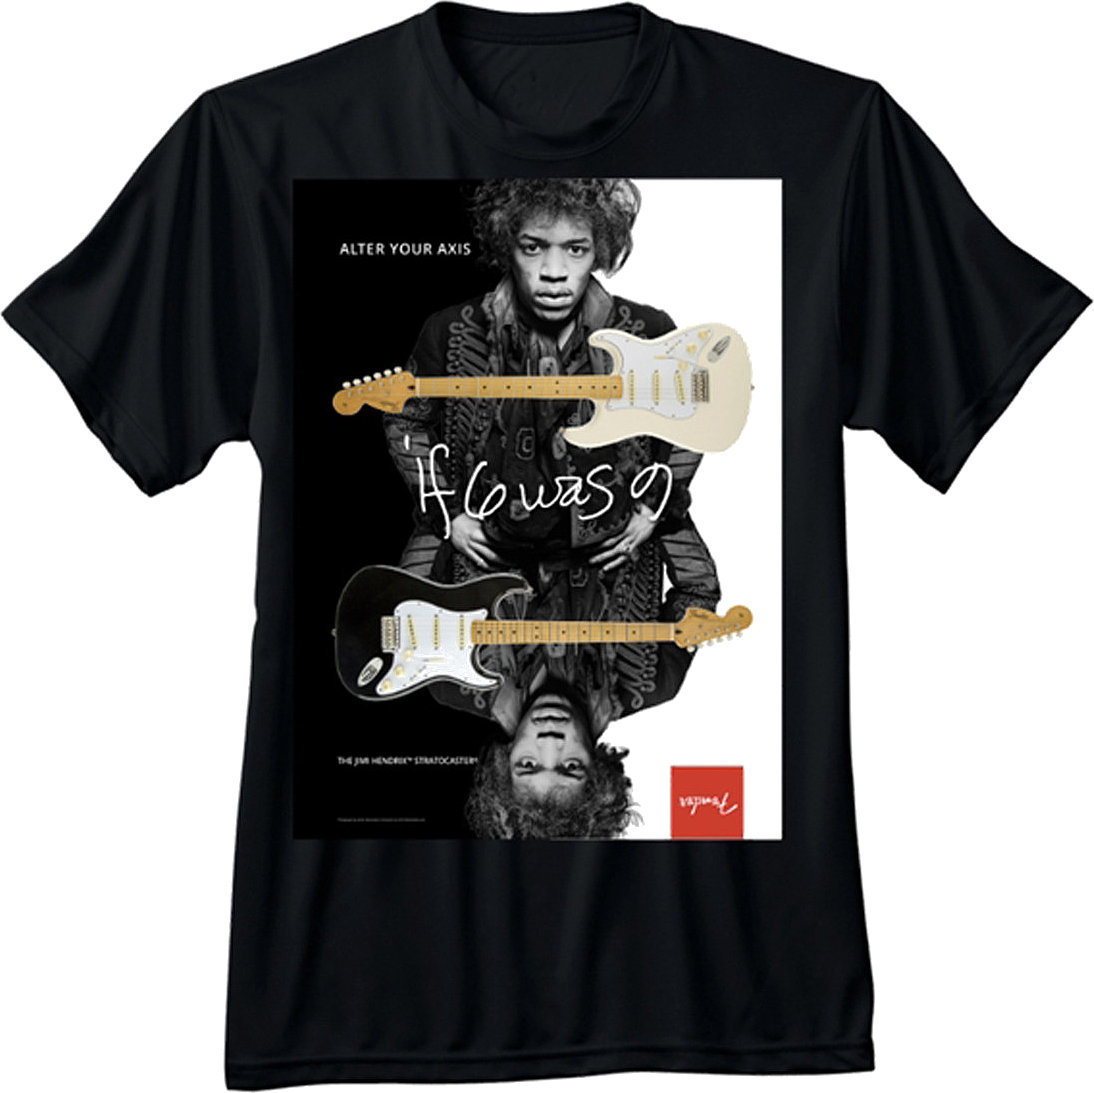 Shirt Fender Jimi Hendrix Collection Alter Your Axis T-Shirt Black L